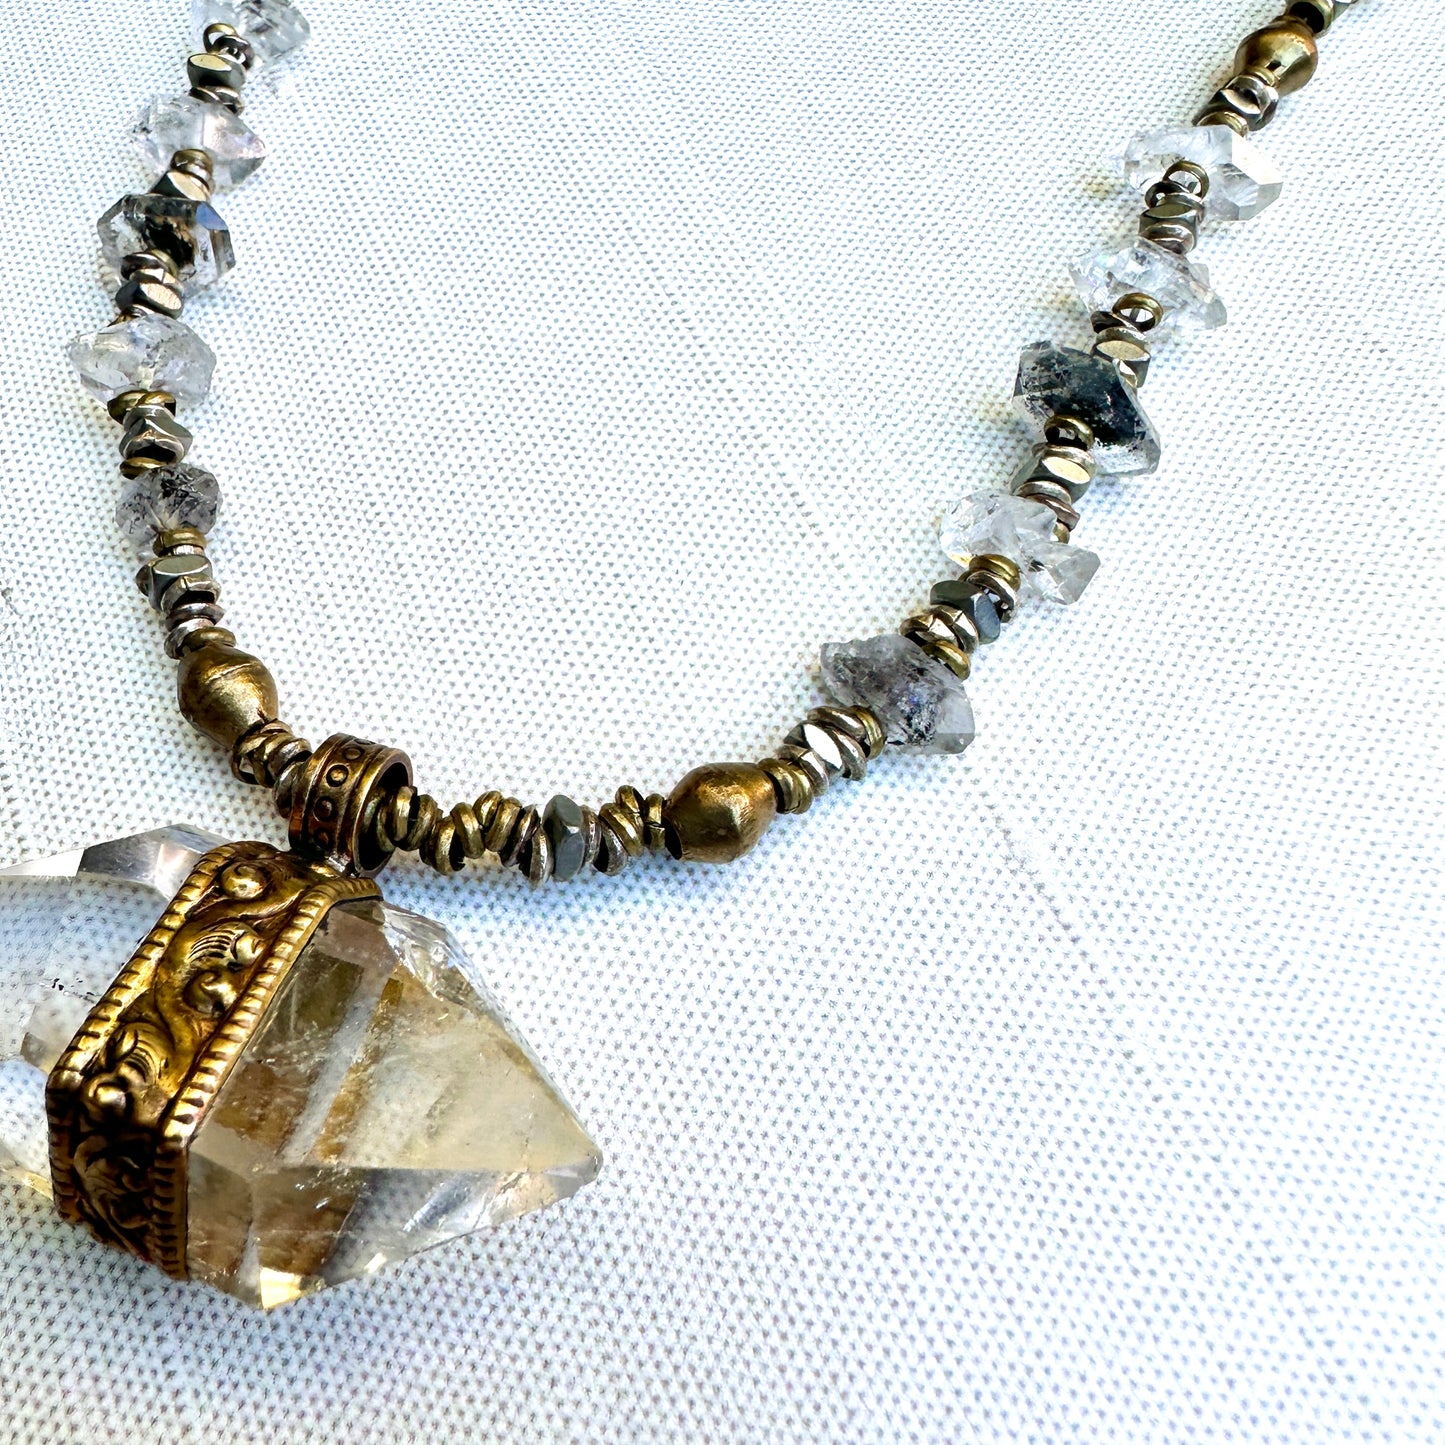 Grounding Protection Necklace